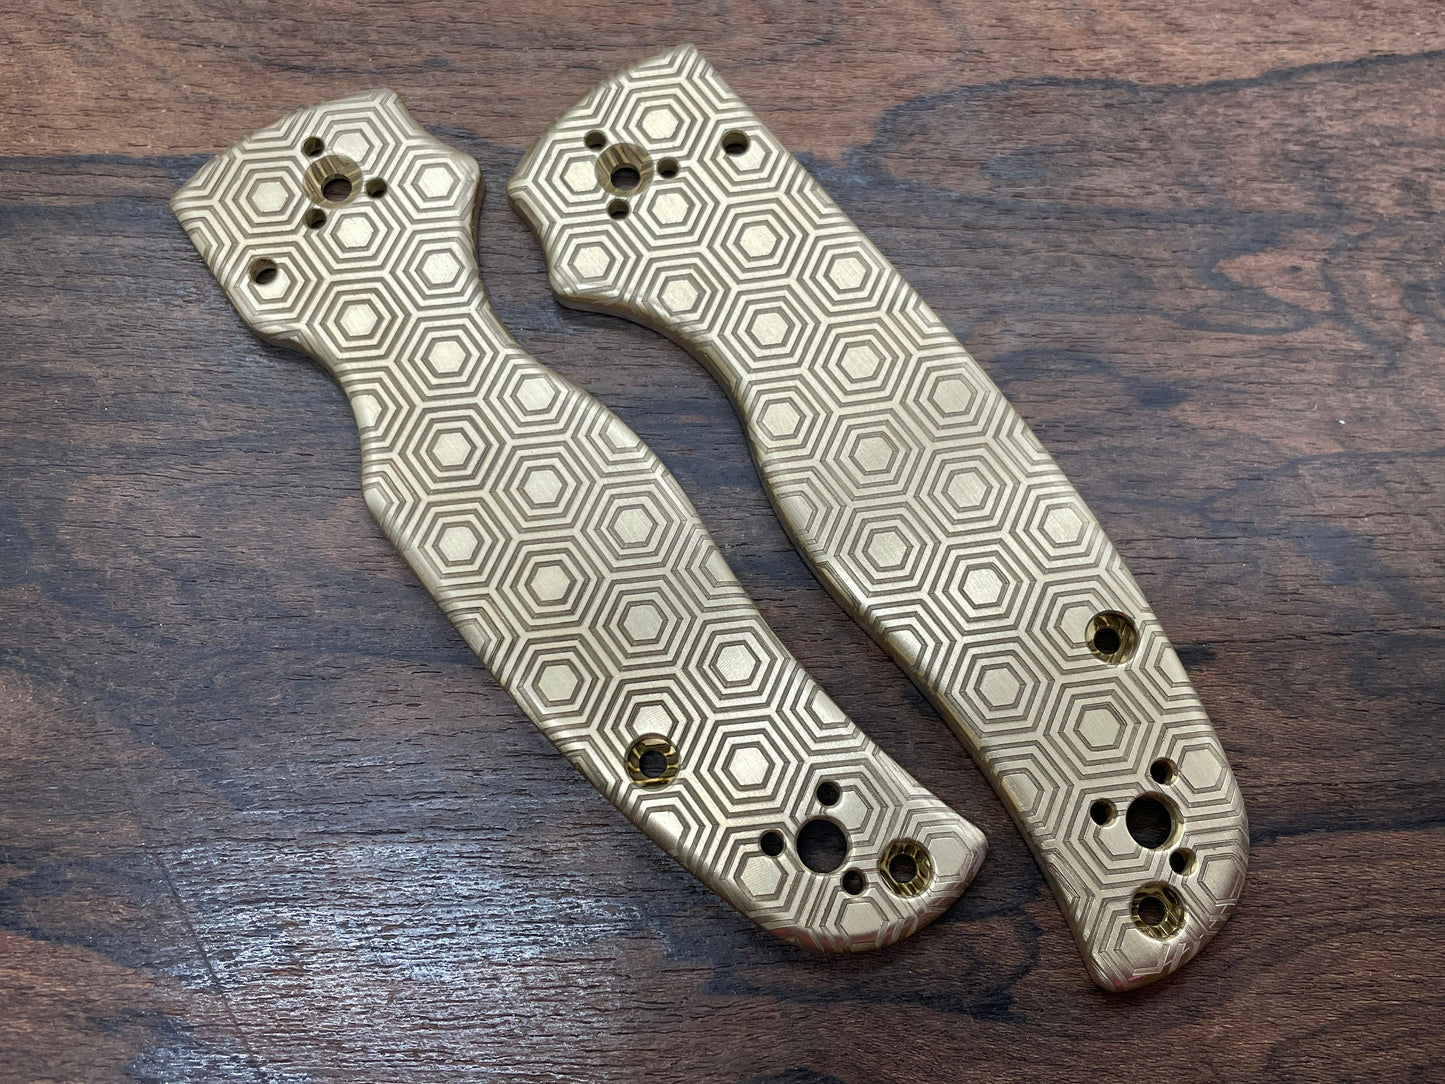 HONEYCOMB engraved Brass Scales for SHAMAN Spyderco